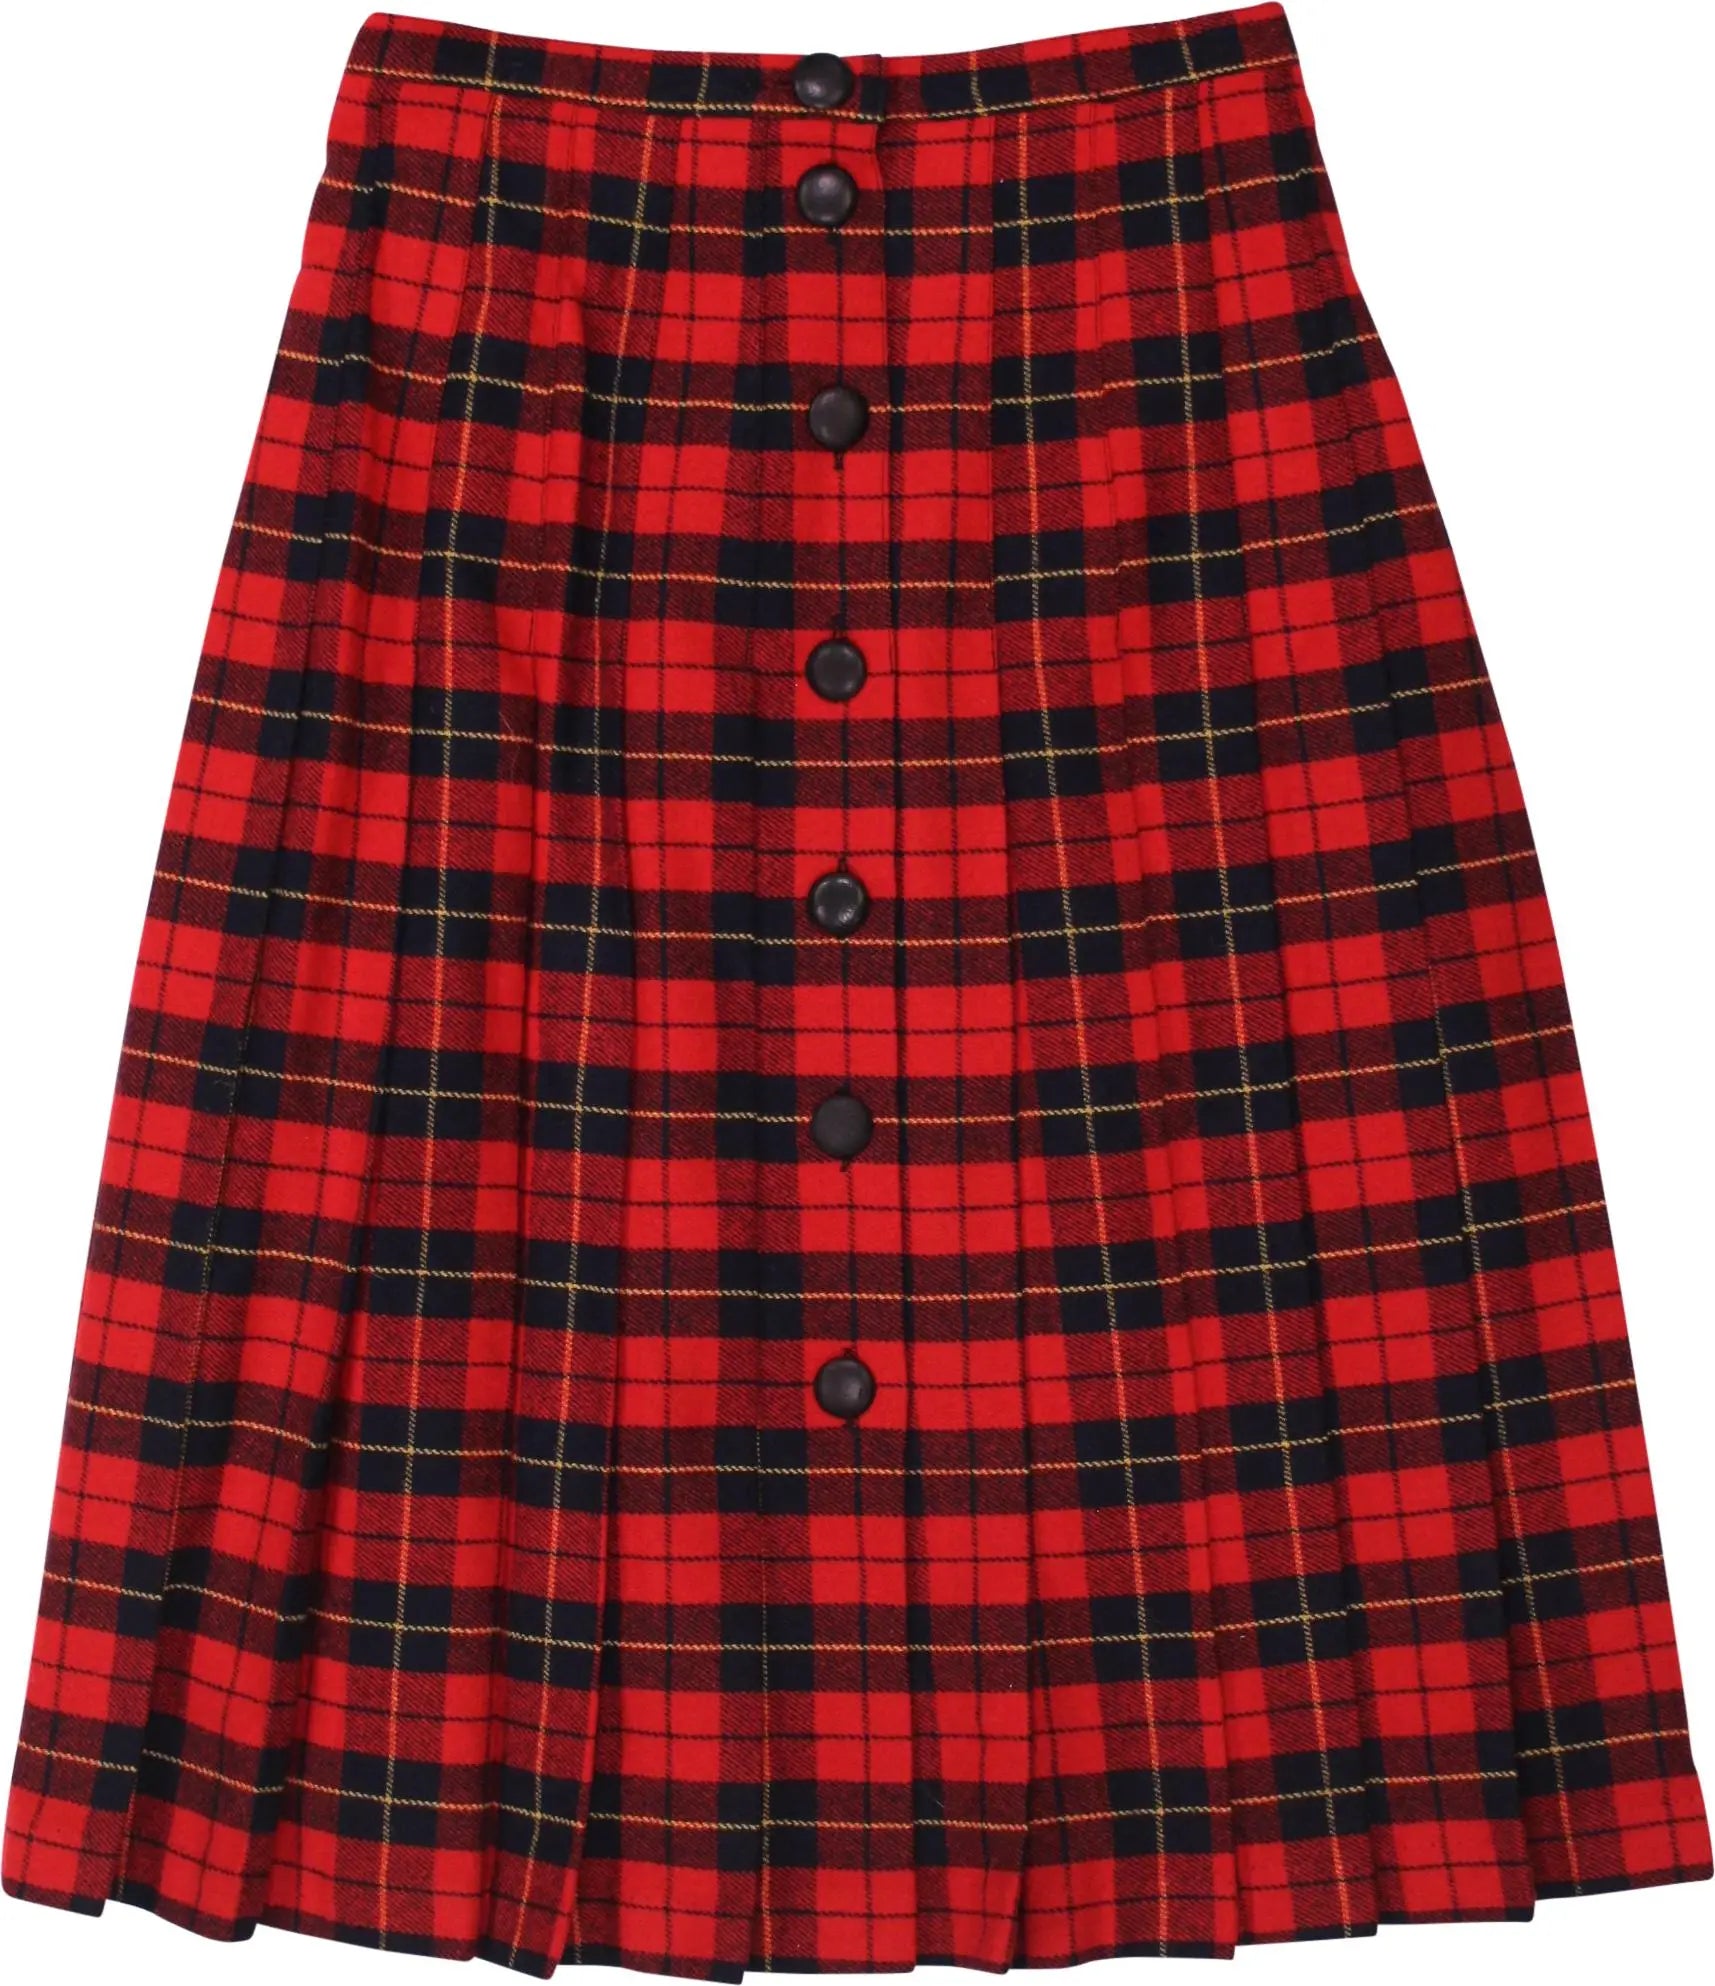 Unknown - Tartan Pleated Skirt- ThriftTale.com - Vintage and second handclothing